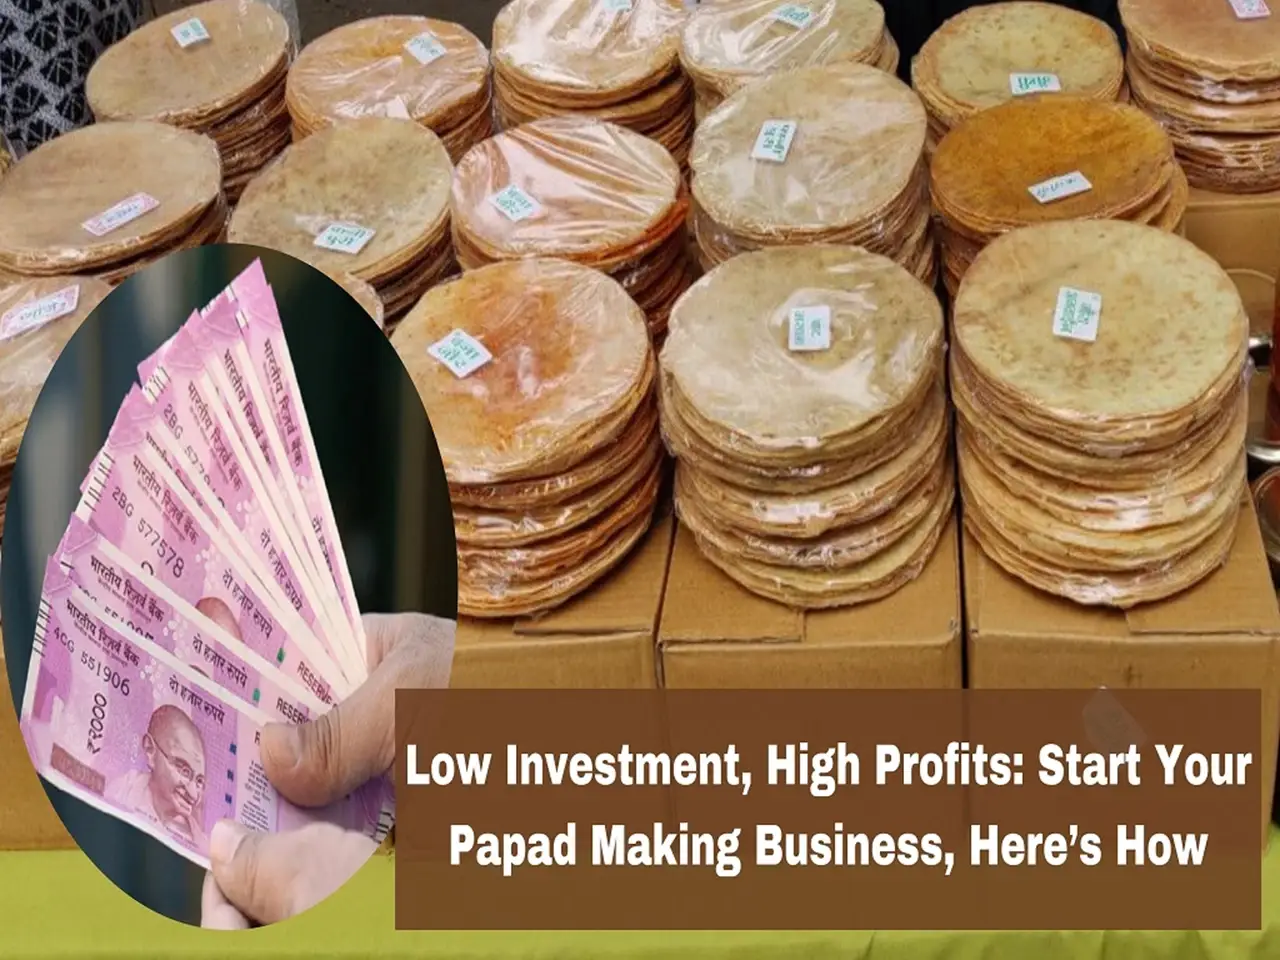 There are a few major brands, but the local brands largely control the papad market